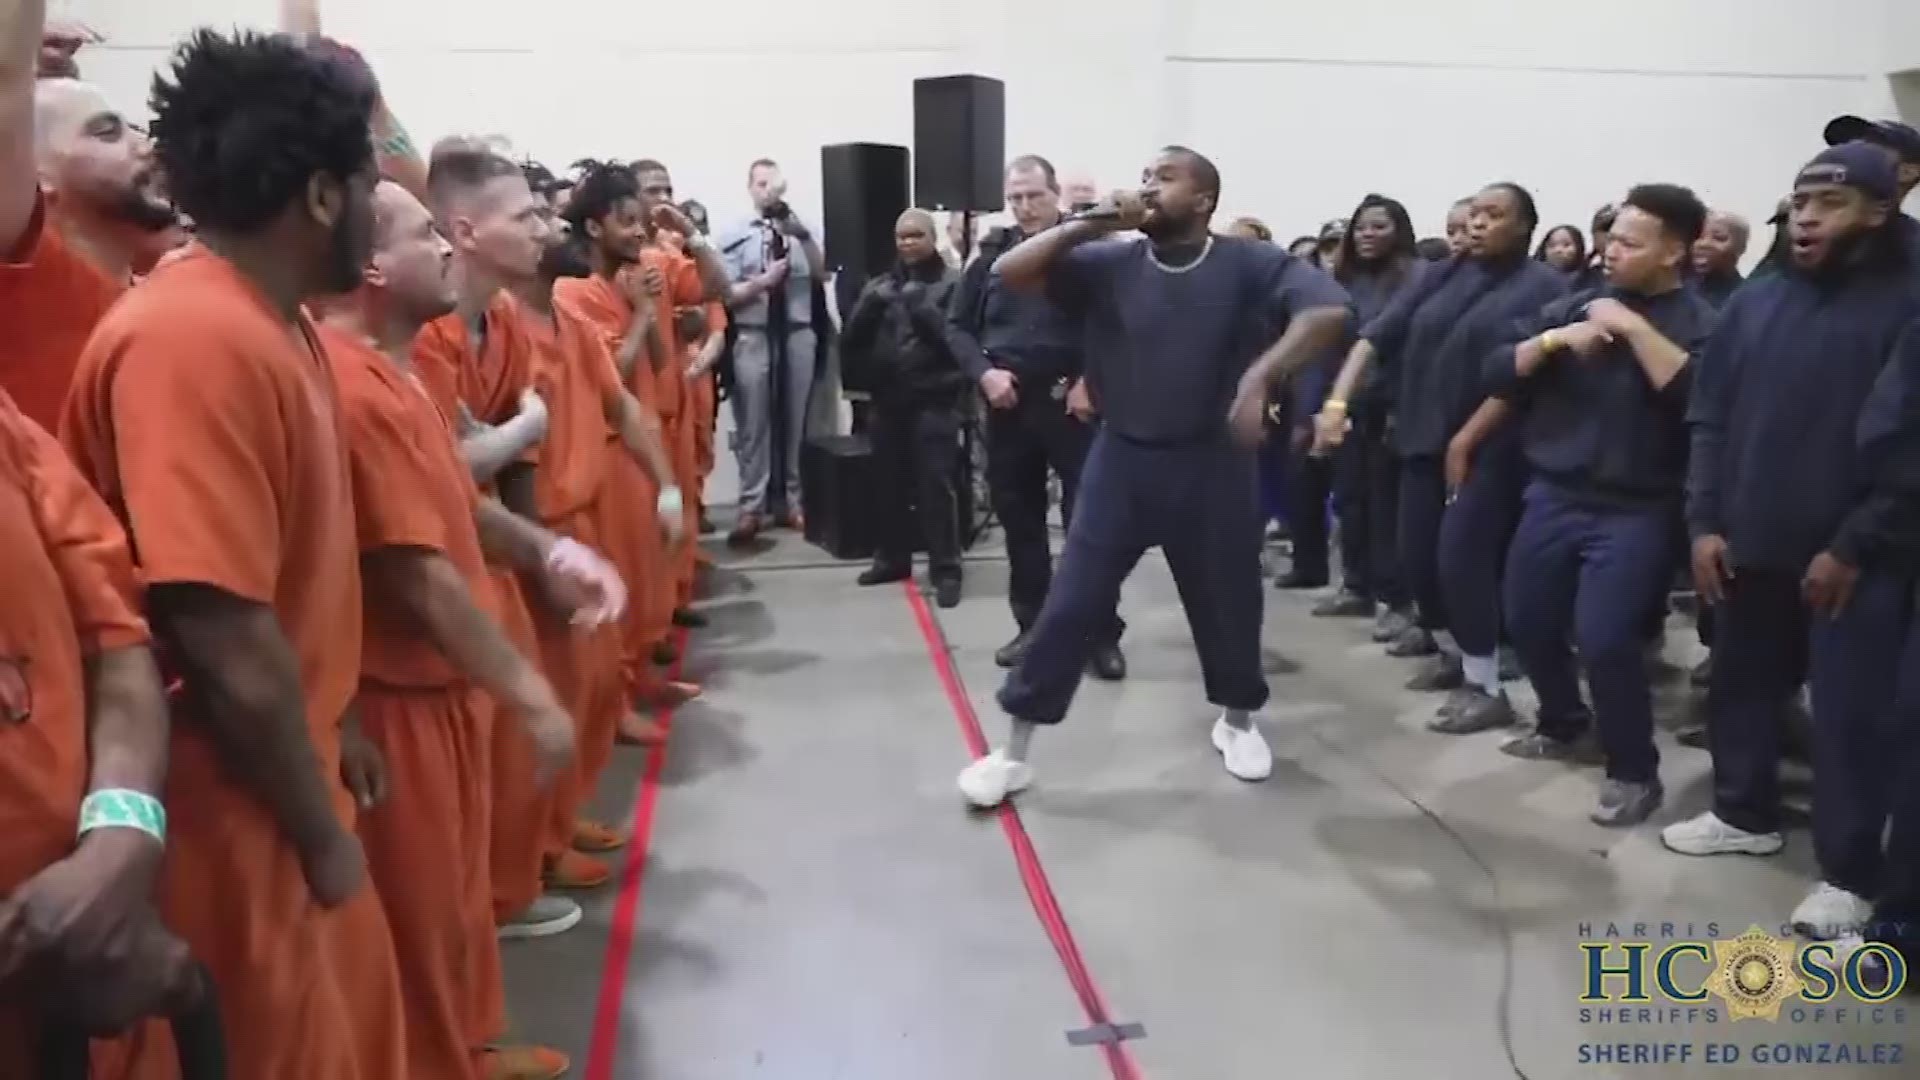 Kanye West surprised about 500 county inmates with a pair of performances on Friday. County chaplains are now seizing the opportunity to help inmates grow.